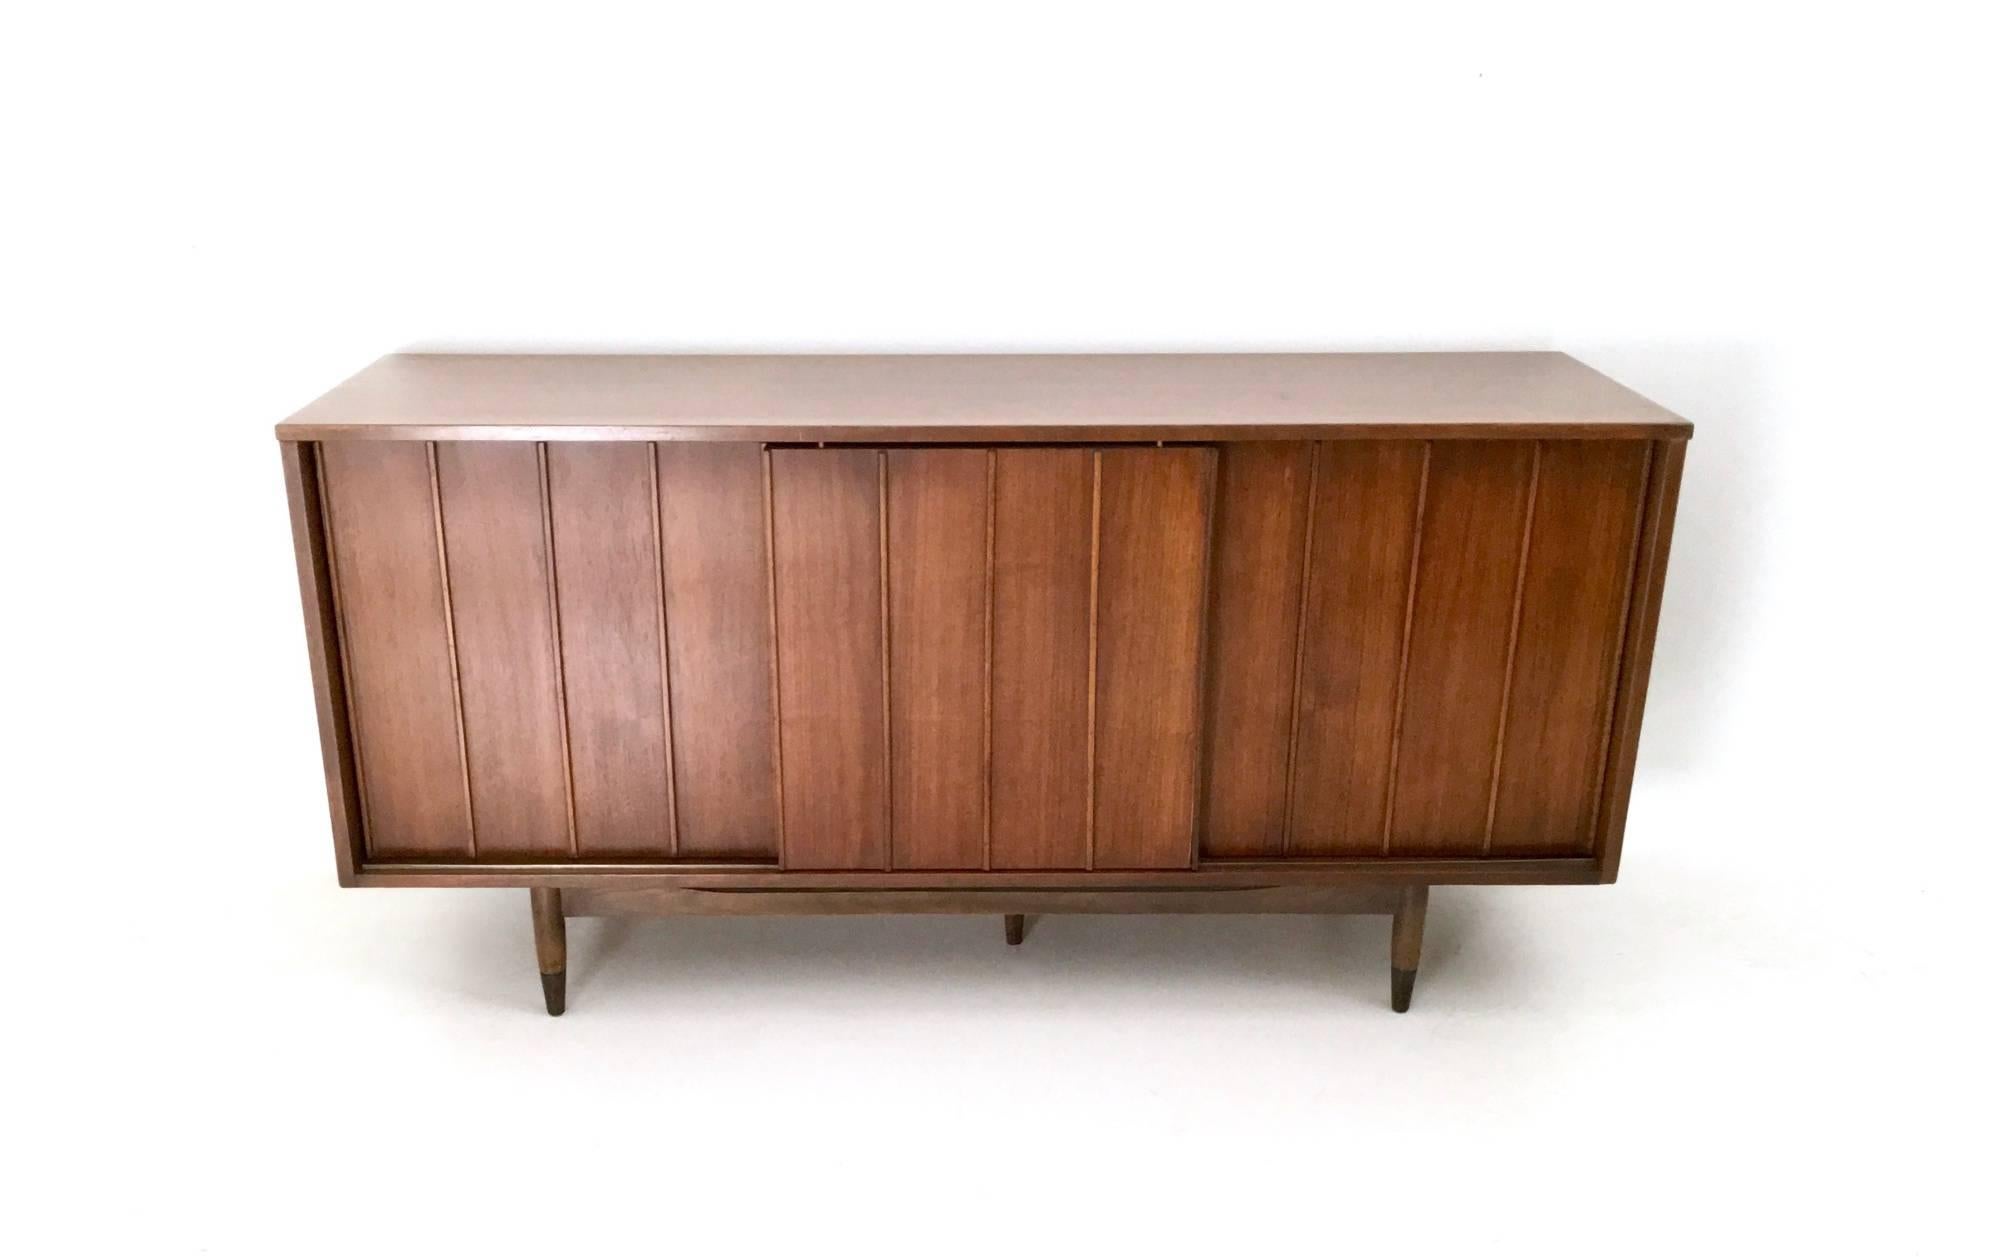 Made in walnut and braided bamboo.
Its doors are double-sided, combinable as you like.
This sideboard has an extractable shelf, that was probably designed as a TV stand, a glass shelf and three drawers.
In excellent original condition and ready